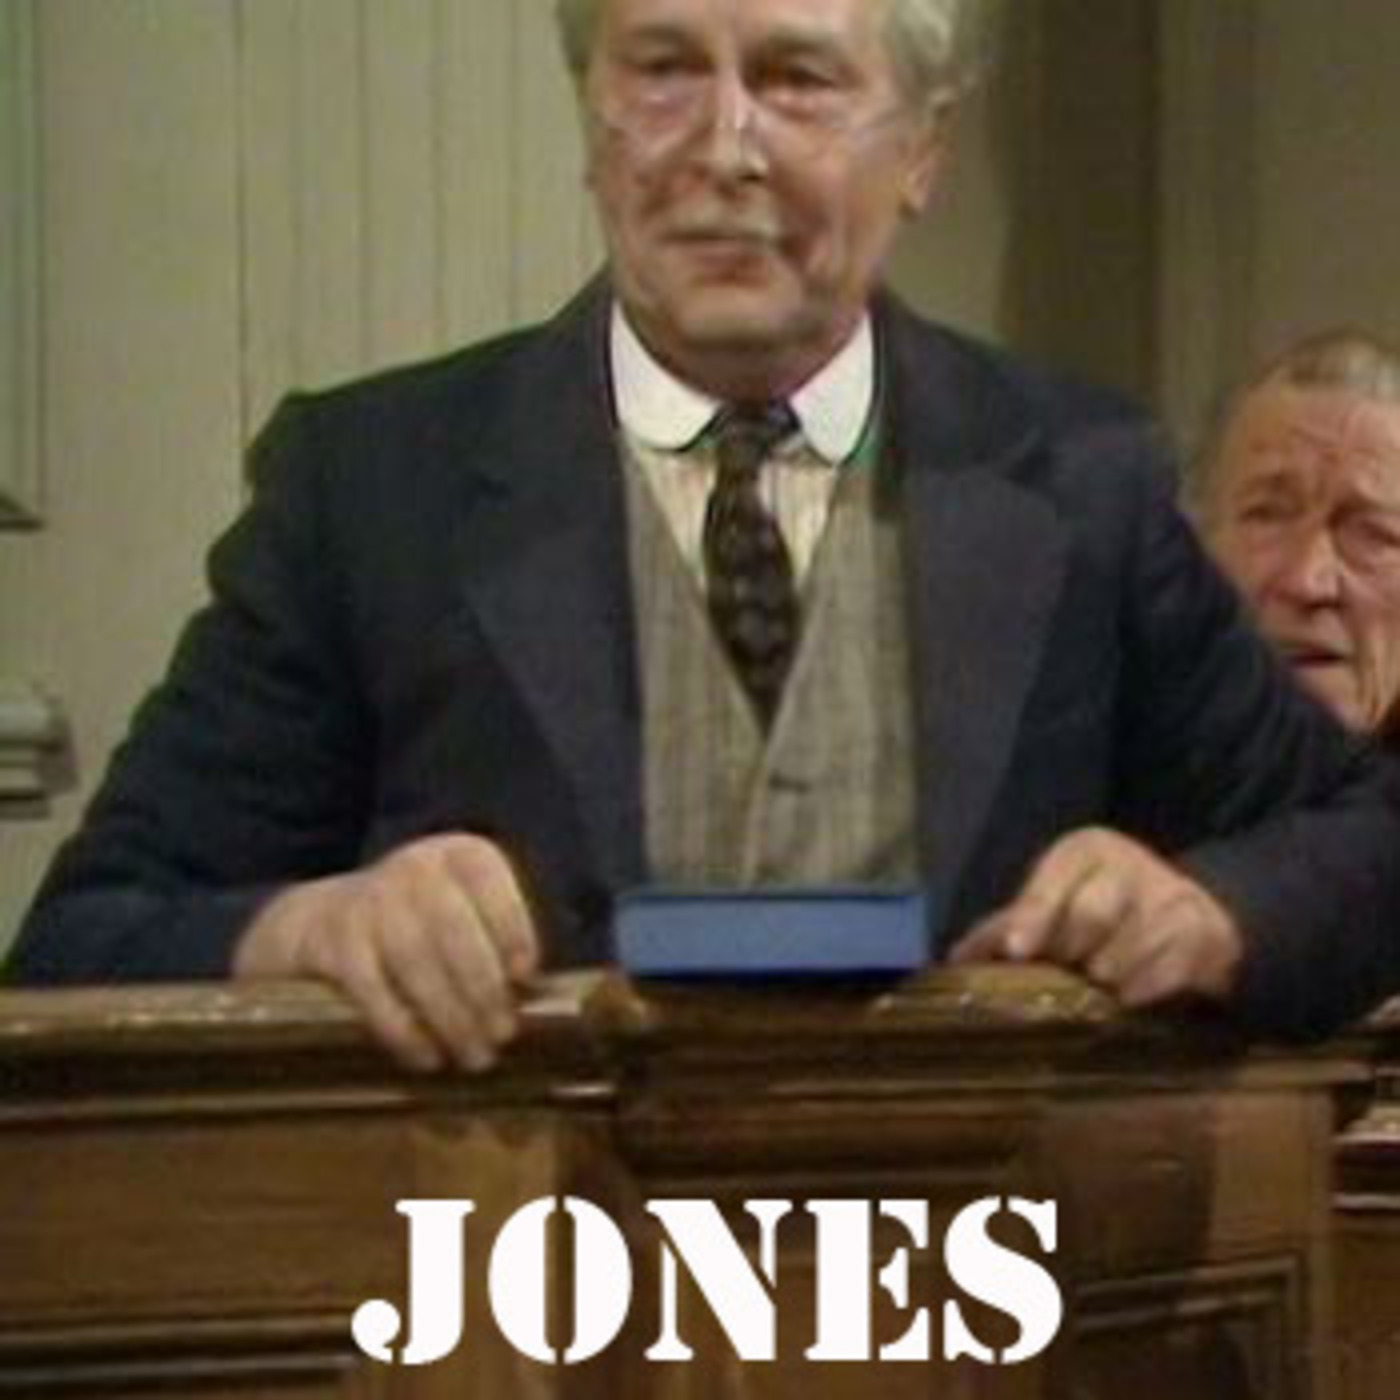 Episode 59 - The Trial of Lance Corporal Jones